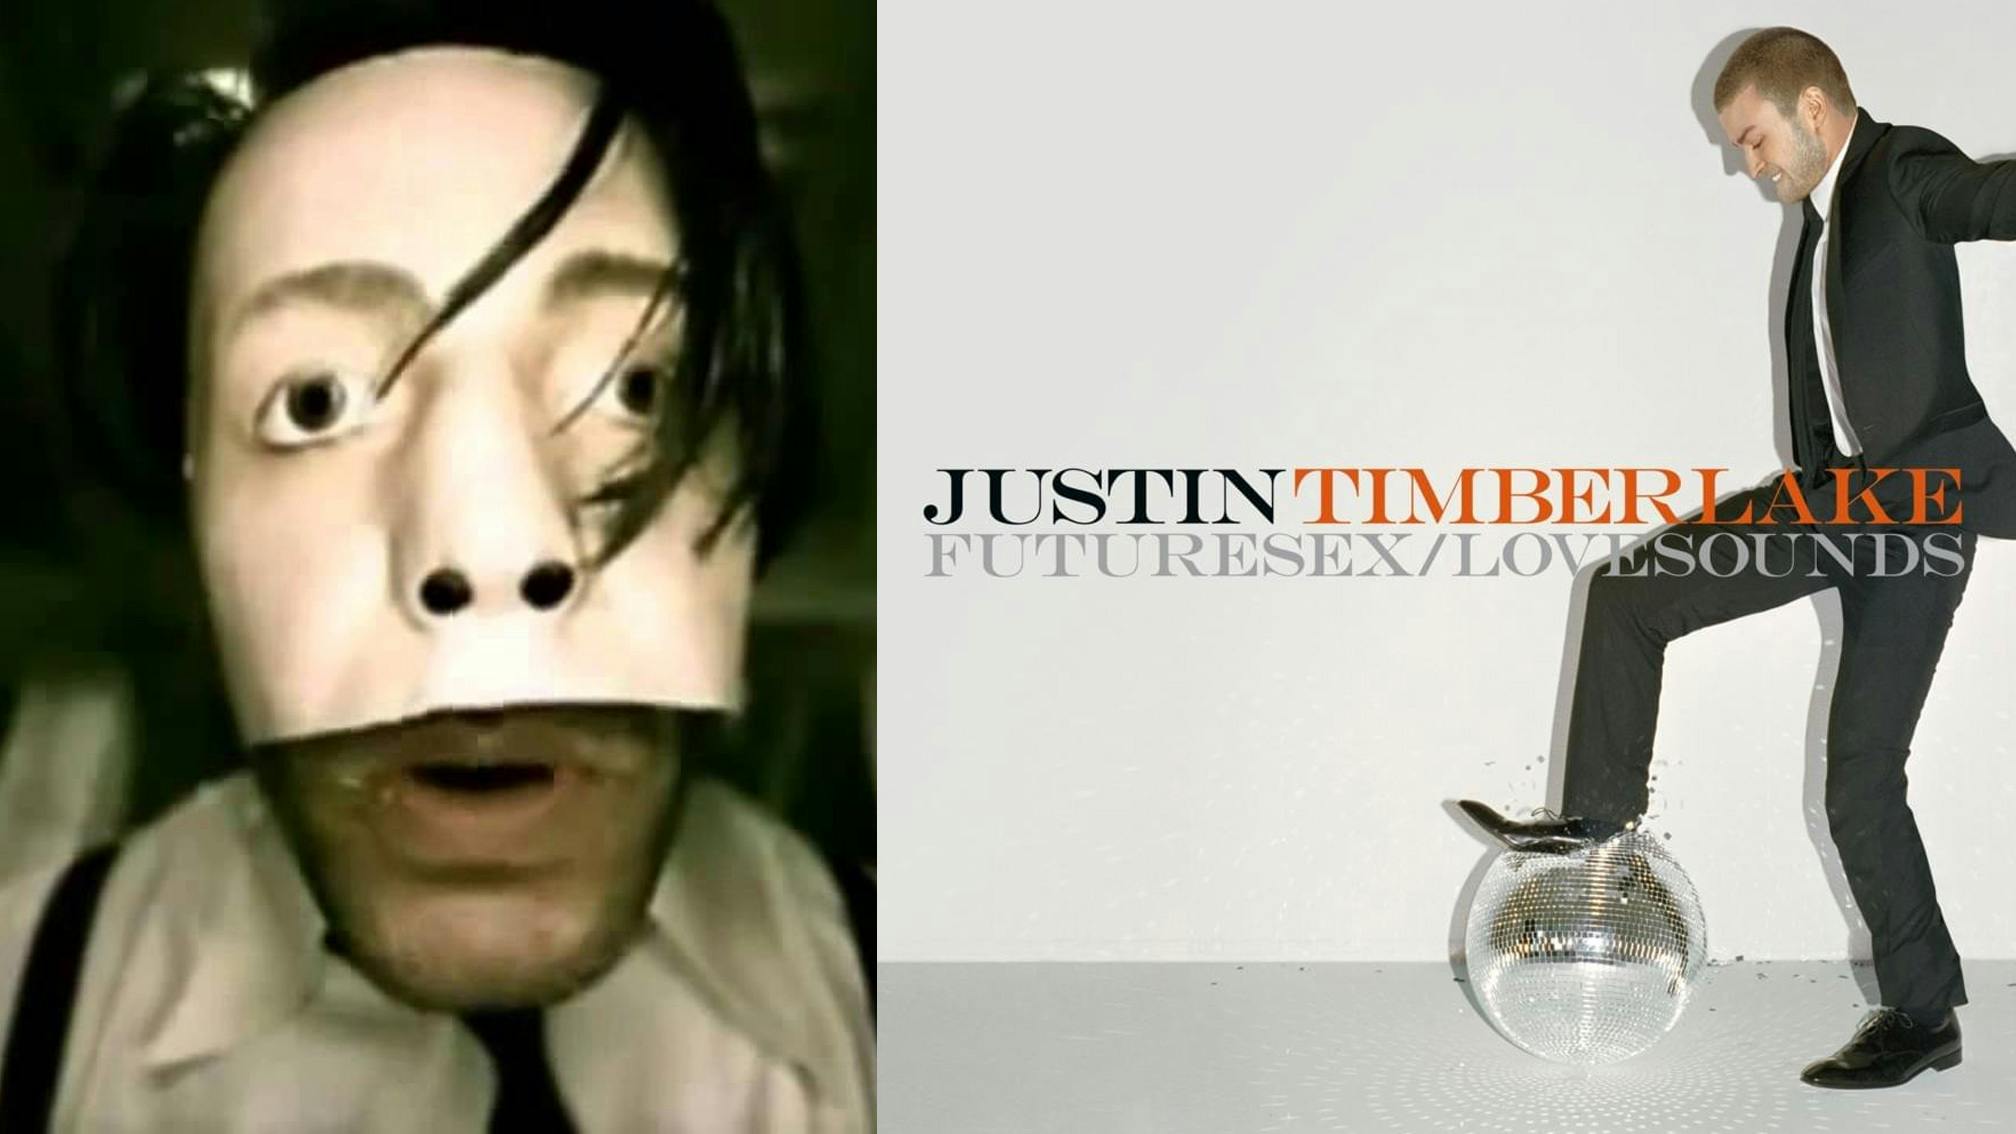 This Rammstein x Justin Timberlake Mash-Up Is All Kinds Of Confusing